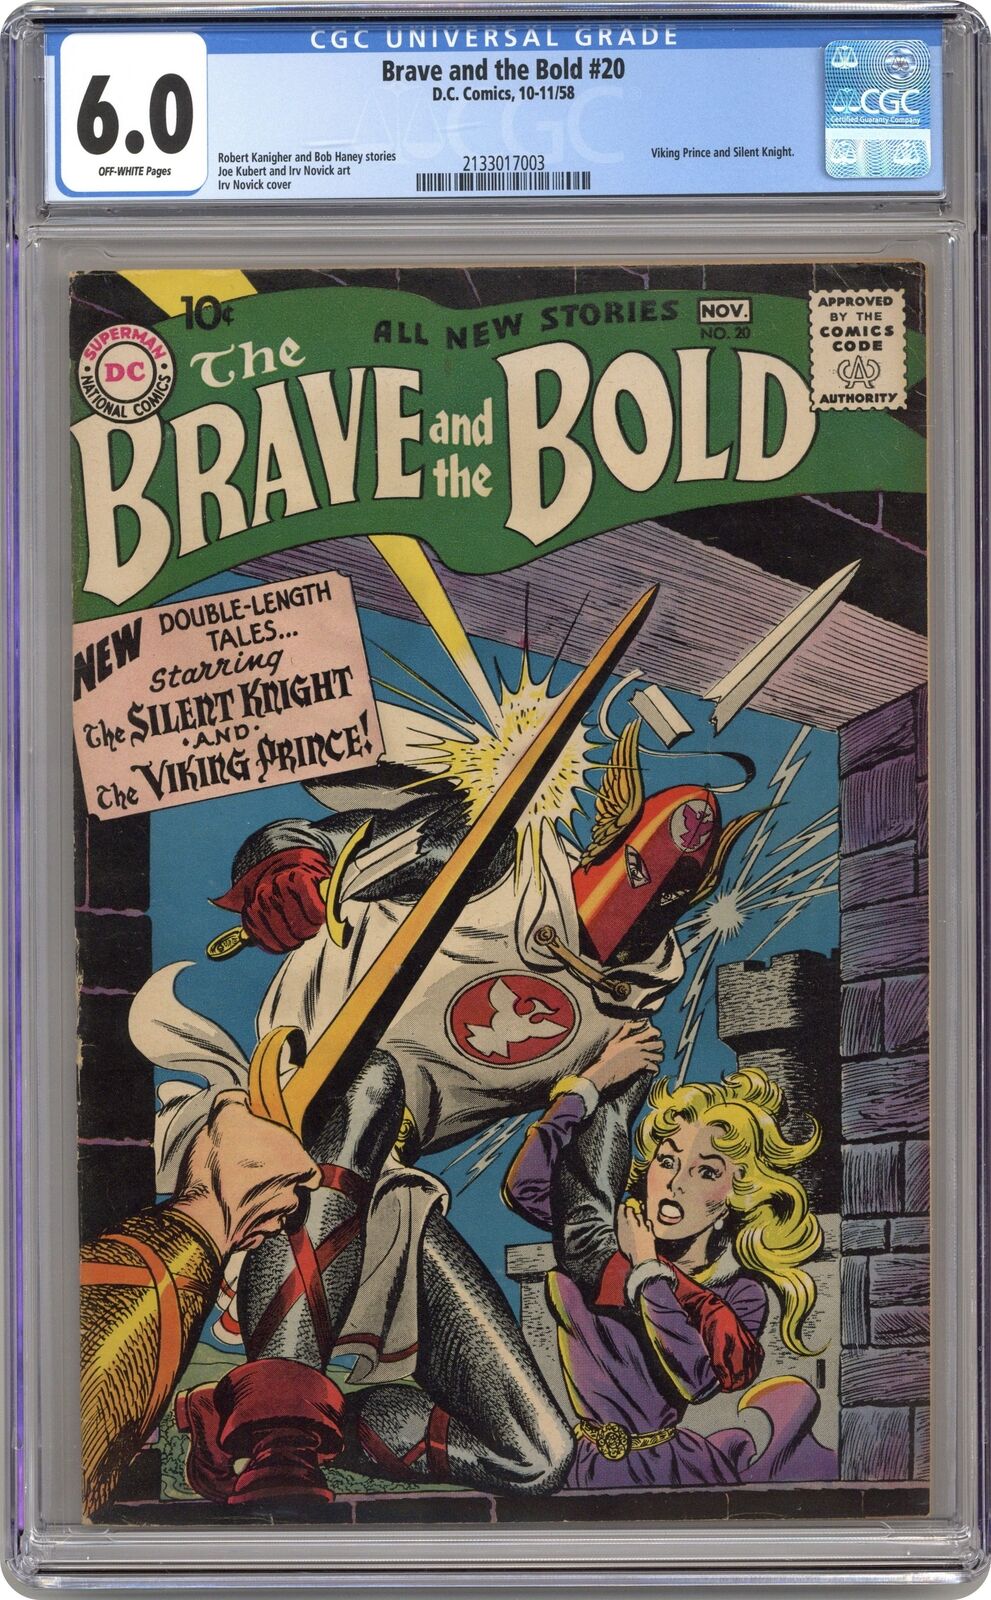 Brave and the Bold #20 CGC 6.0 1958 2133017003